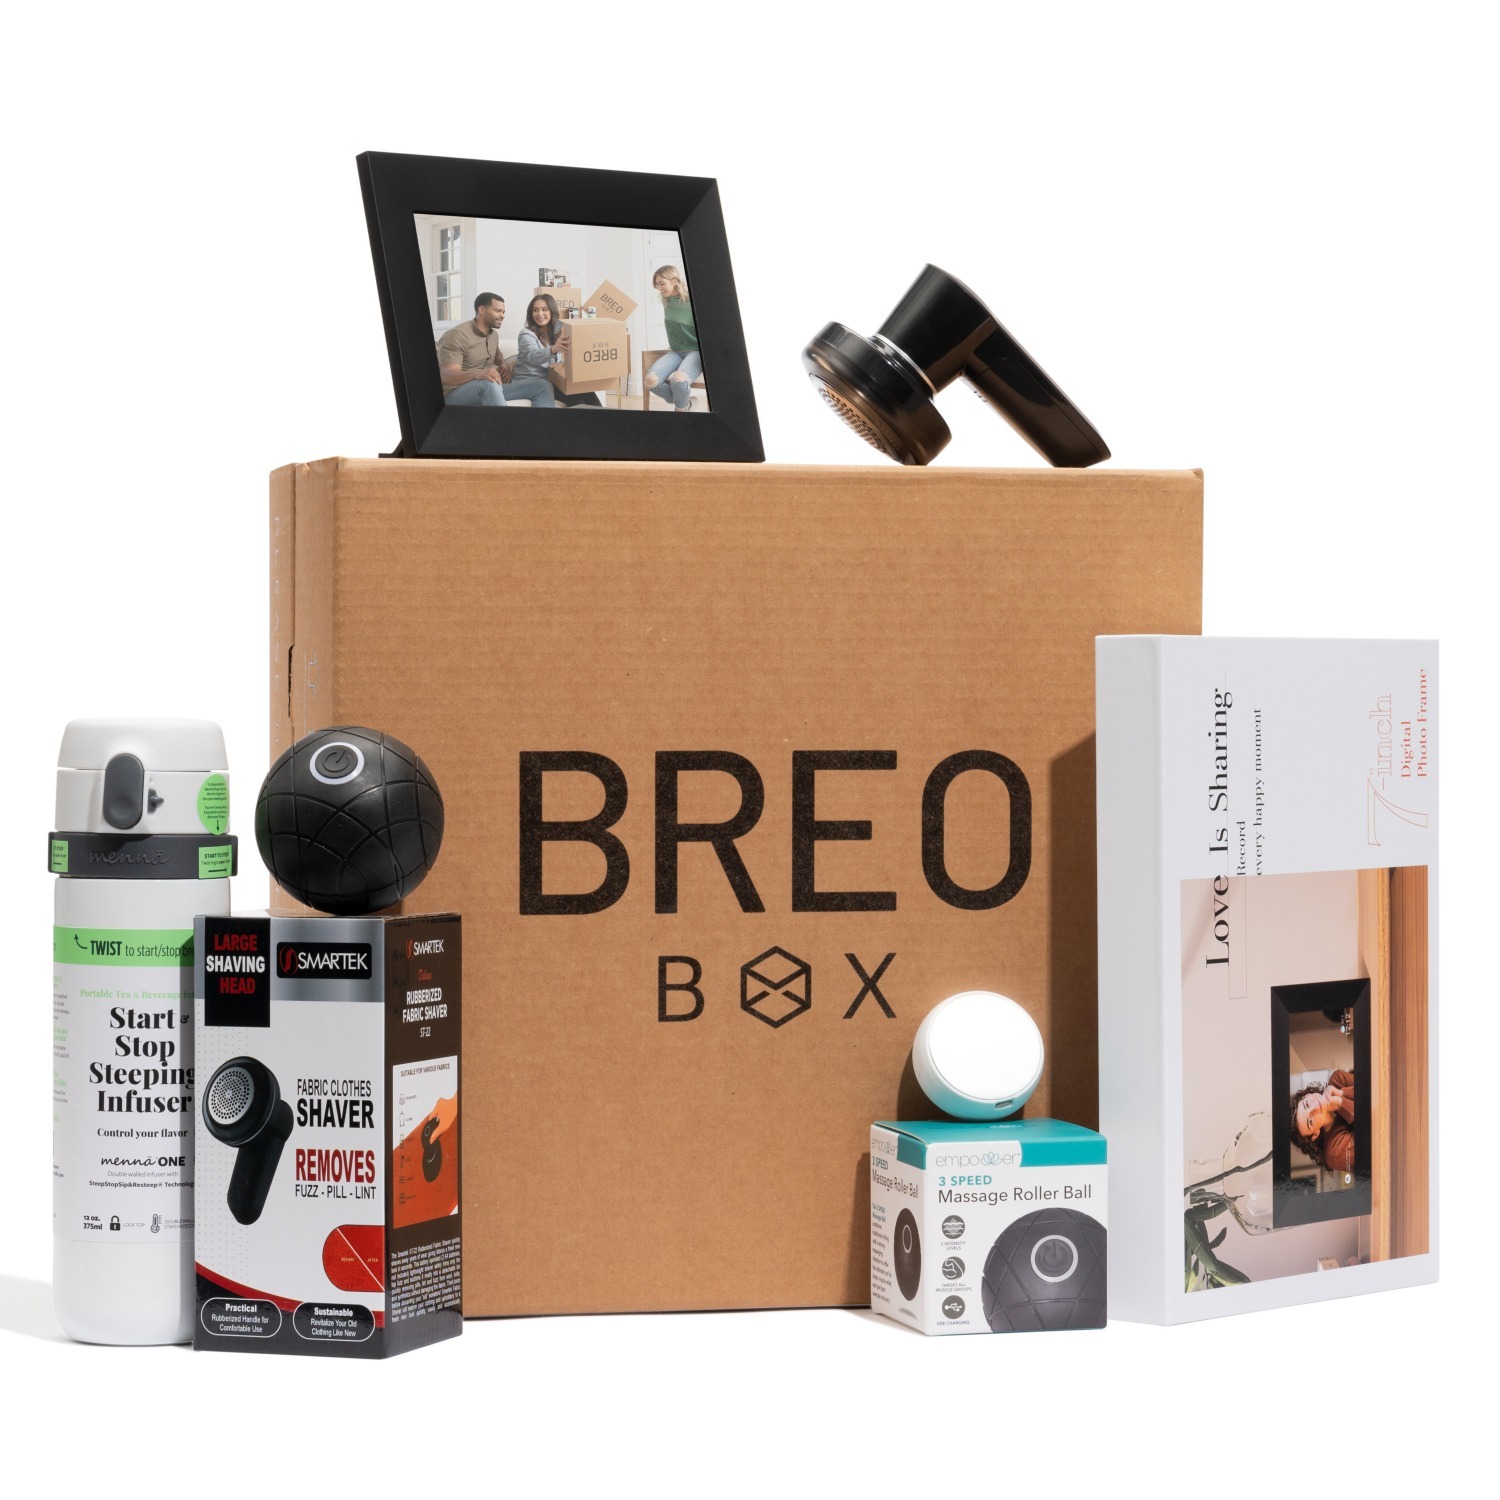 BREO Box Tech & Gadget Winter 2022 Edition One-Time Purchase $105 + Free Shipping